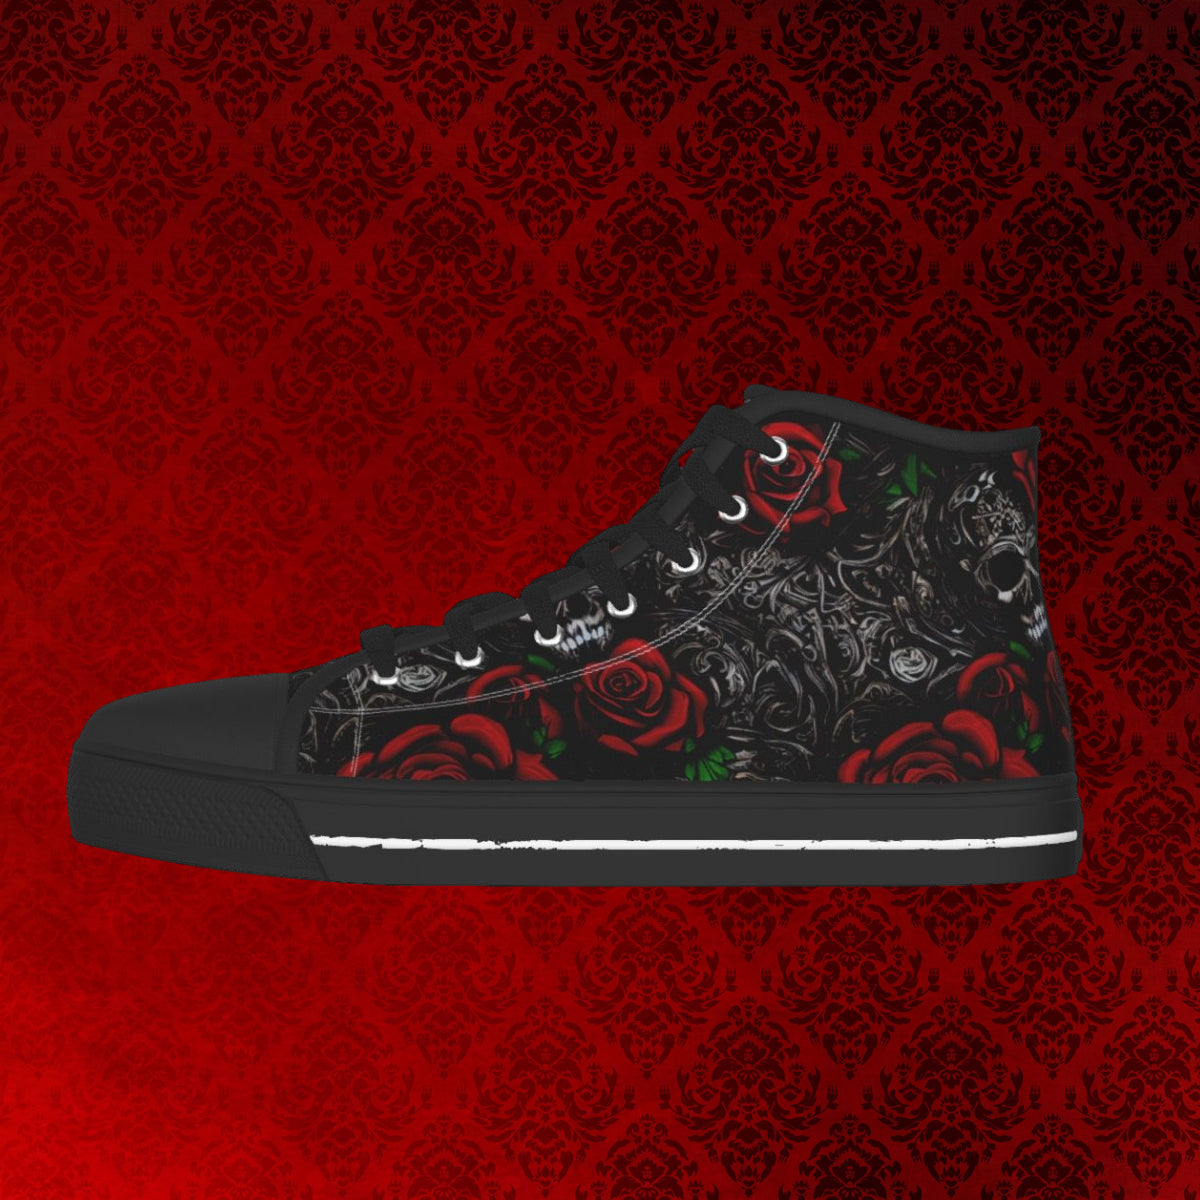 Women's Black and Red Gothic Floral Skull and Roses Pattern Converse Style Shoes